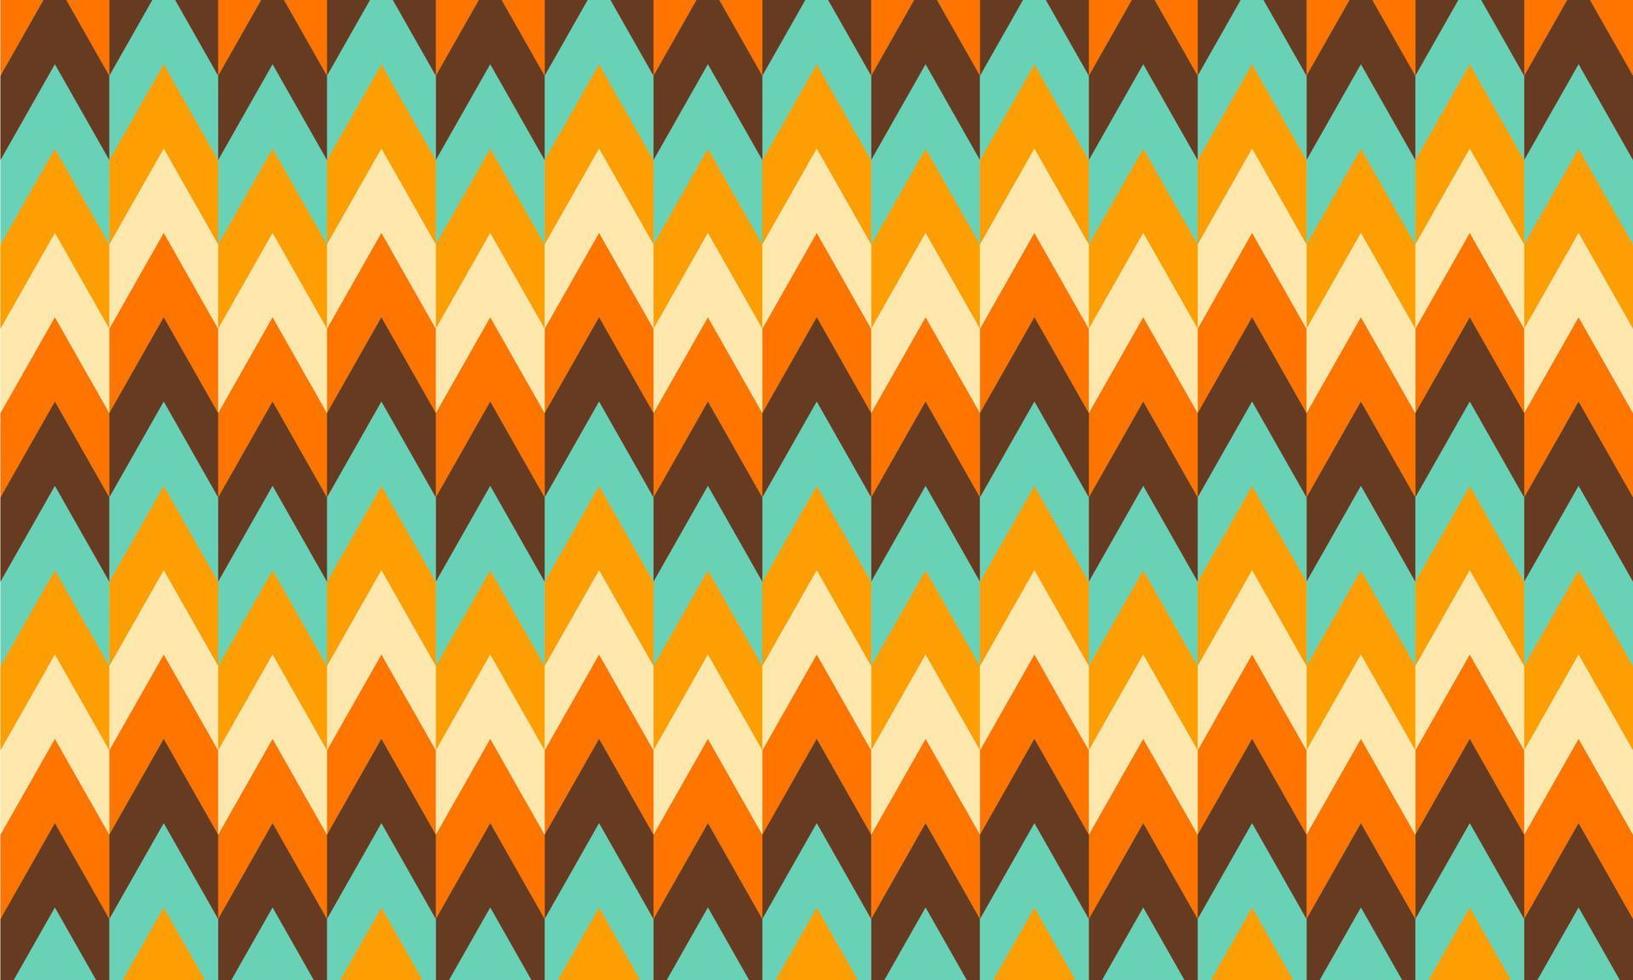 Abstract Retro Vintage Color Pattern Wallpaper Background vector